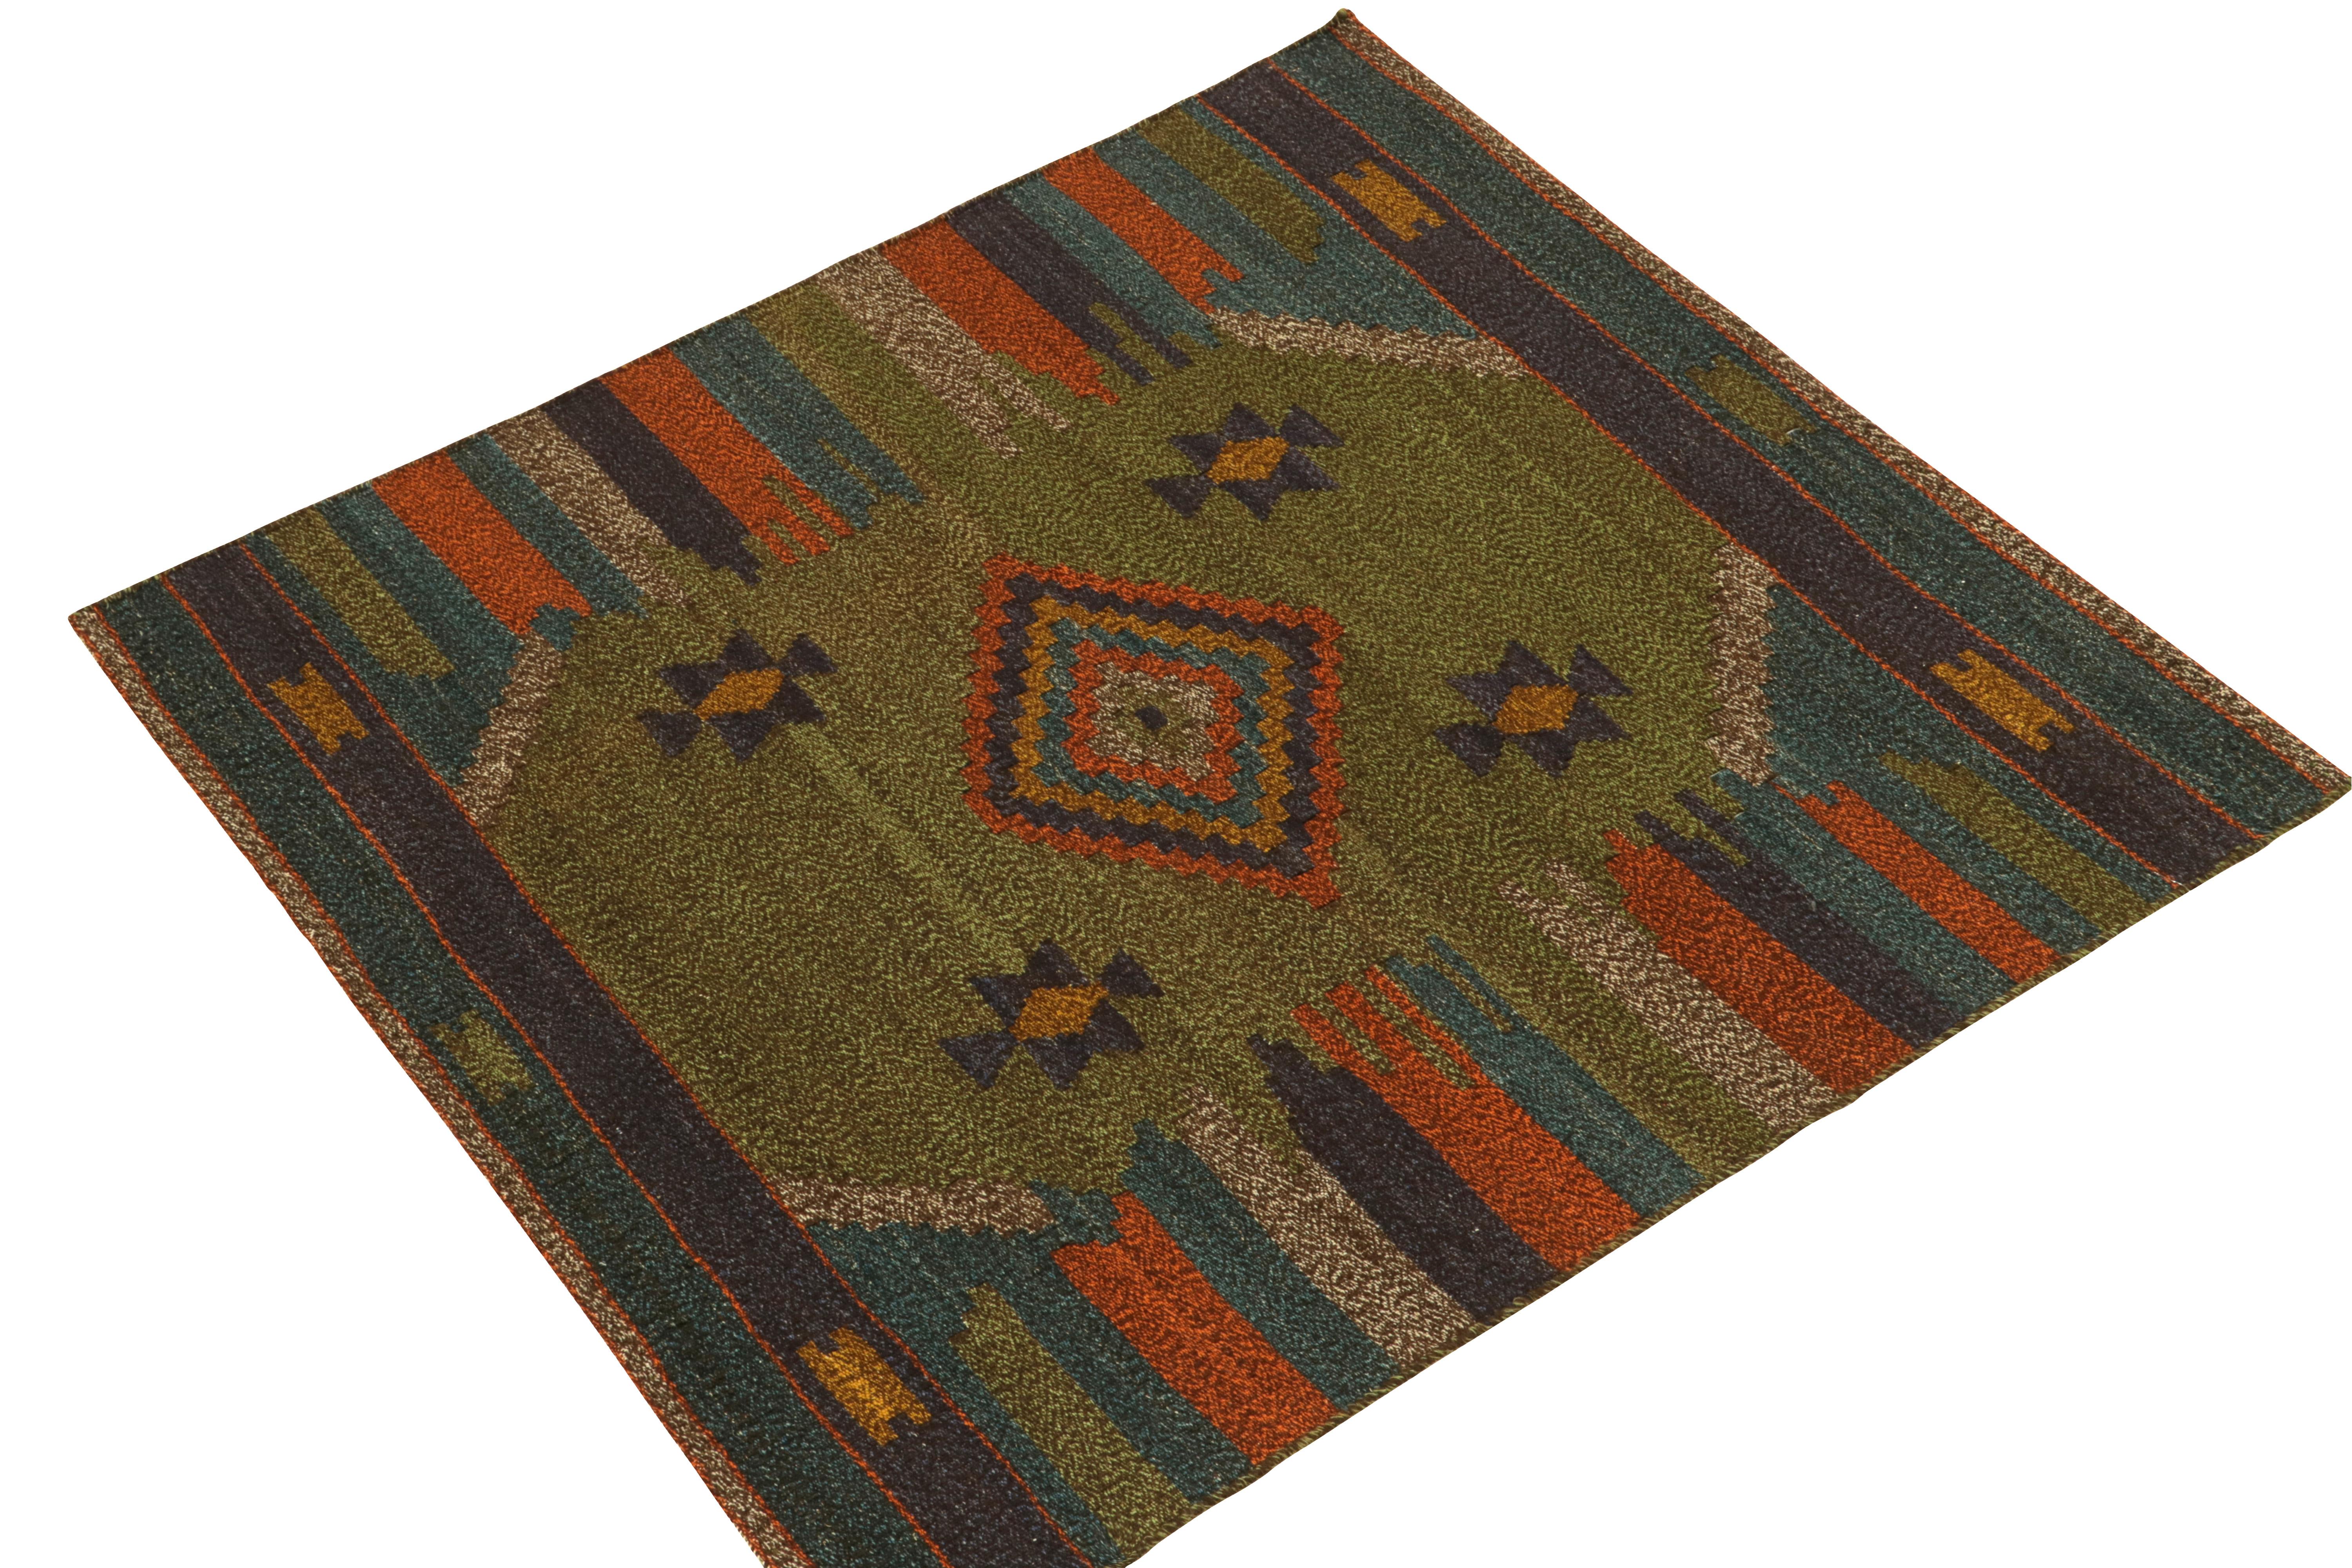 Handwoven in wool circa 1980-1990, from a rare vintage curation of small-sized Kilim rugs joining our tribal classics. A lineage called Sofreh rugs, distinguished among Persian flat weaves for durability and playful hues alike.

The piece carries